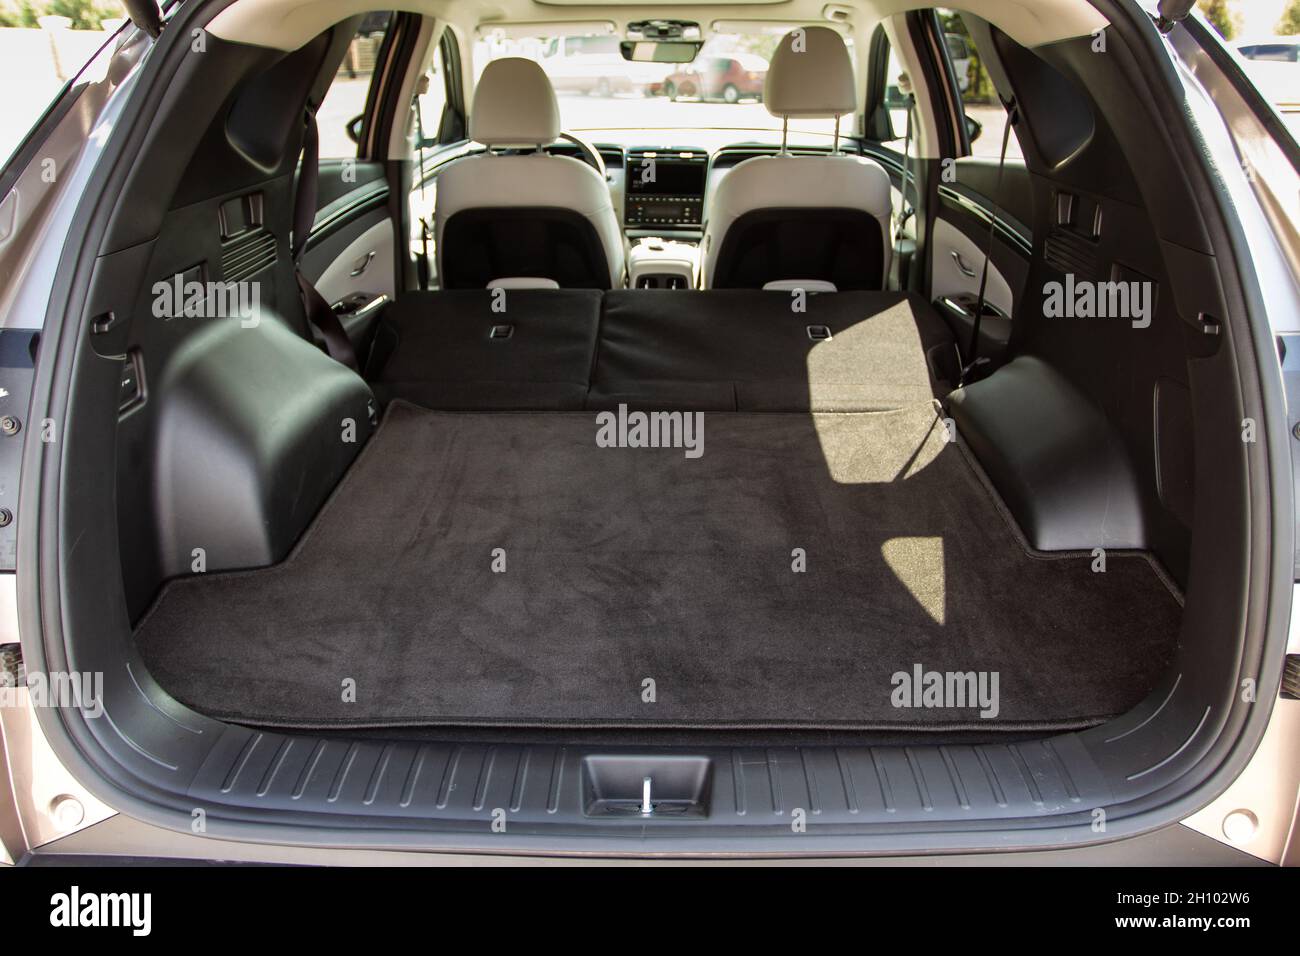 Huge, clean and empty car trunk of a modern compact suv. Rear view of a SUV car with open trunk and folded passenger seats. Stock Photo